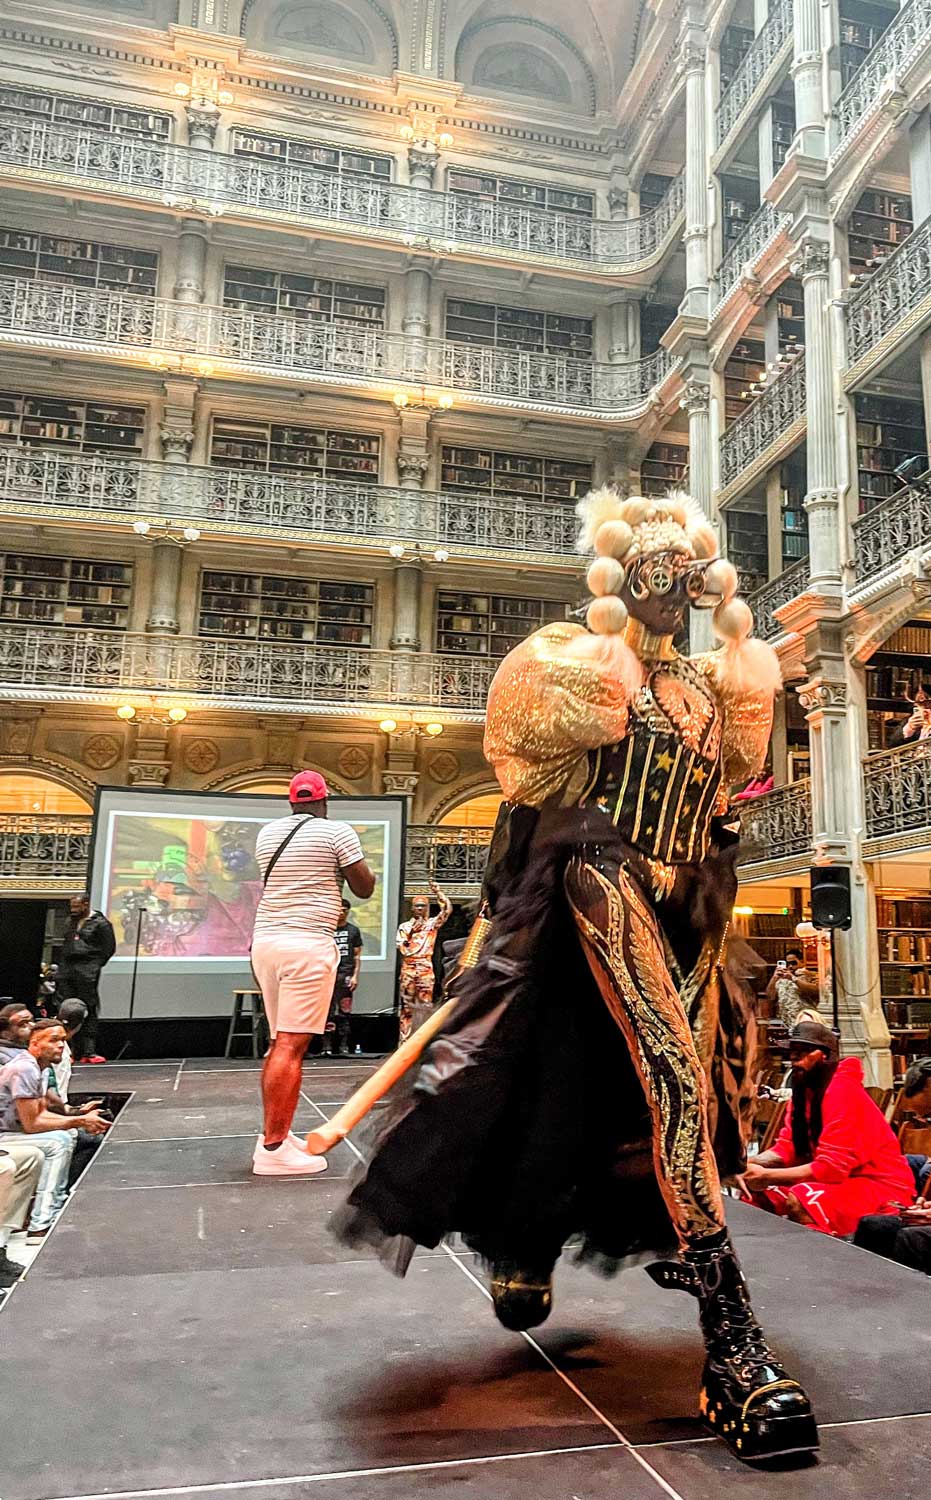 A performer in a futuristic costume on the stage at the George Peabody Library